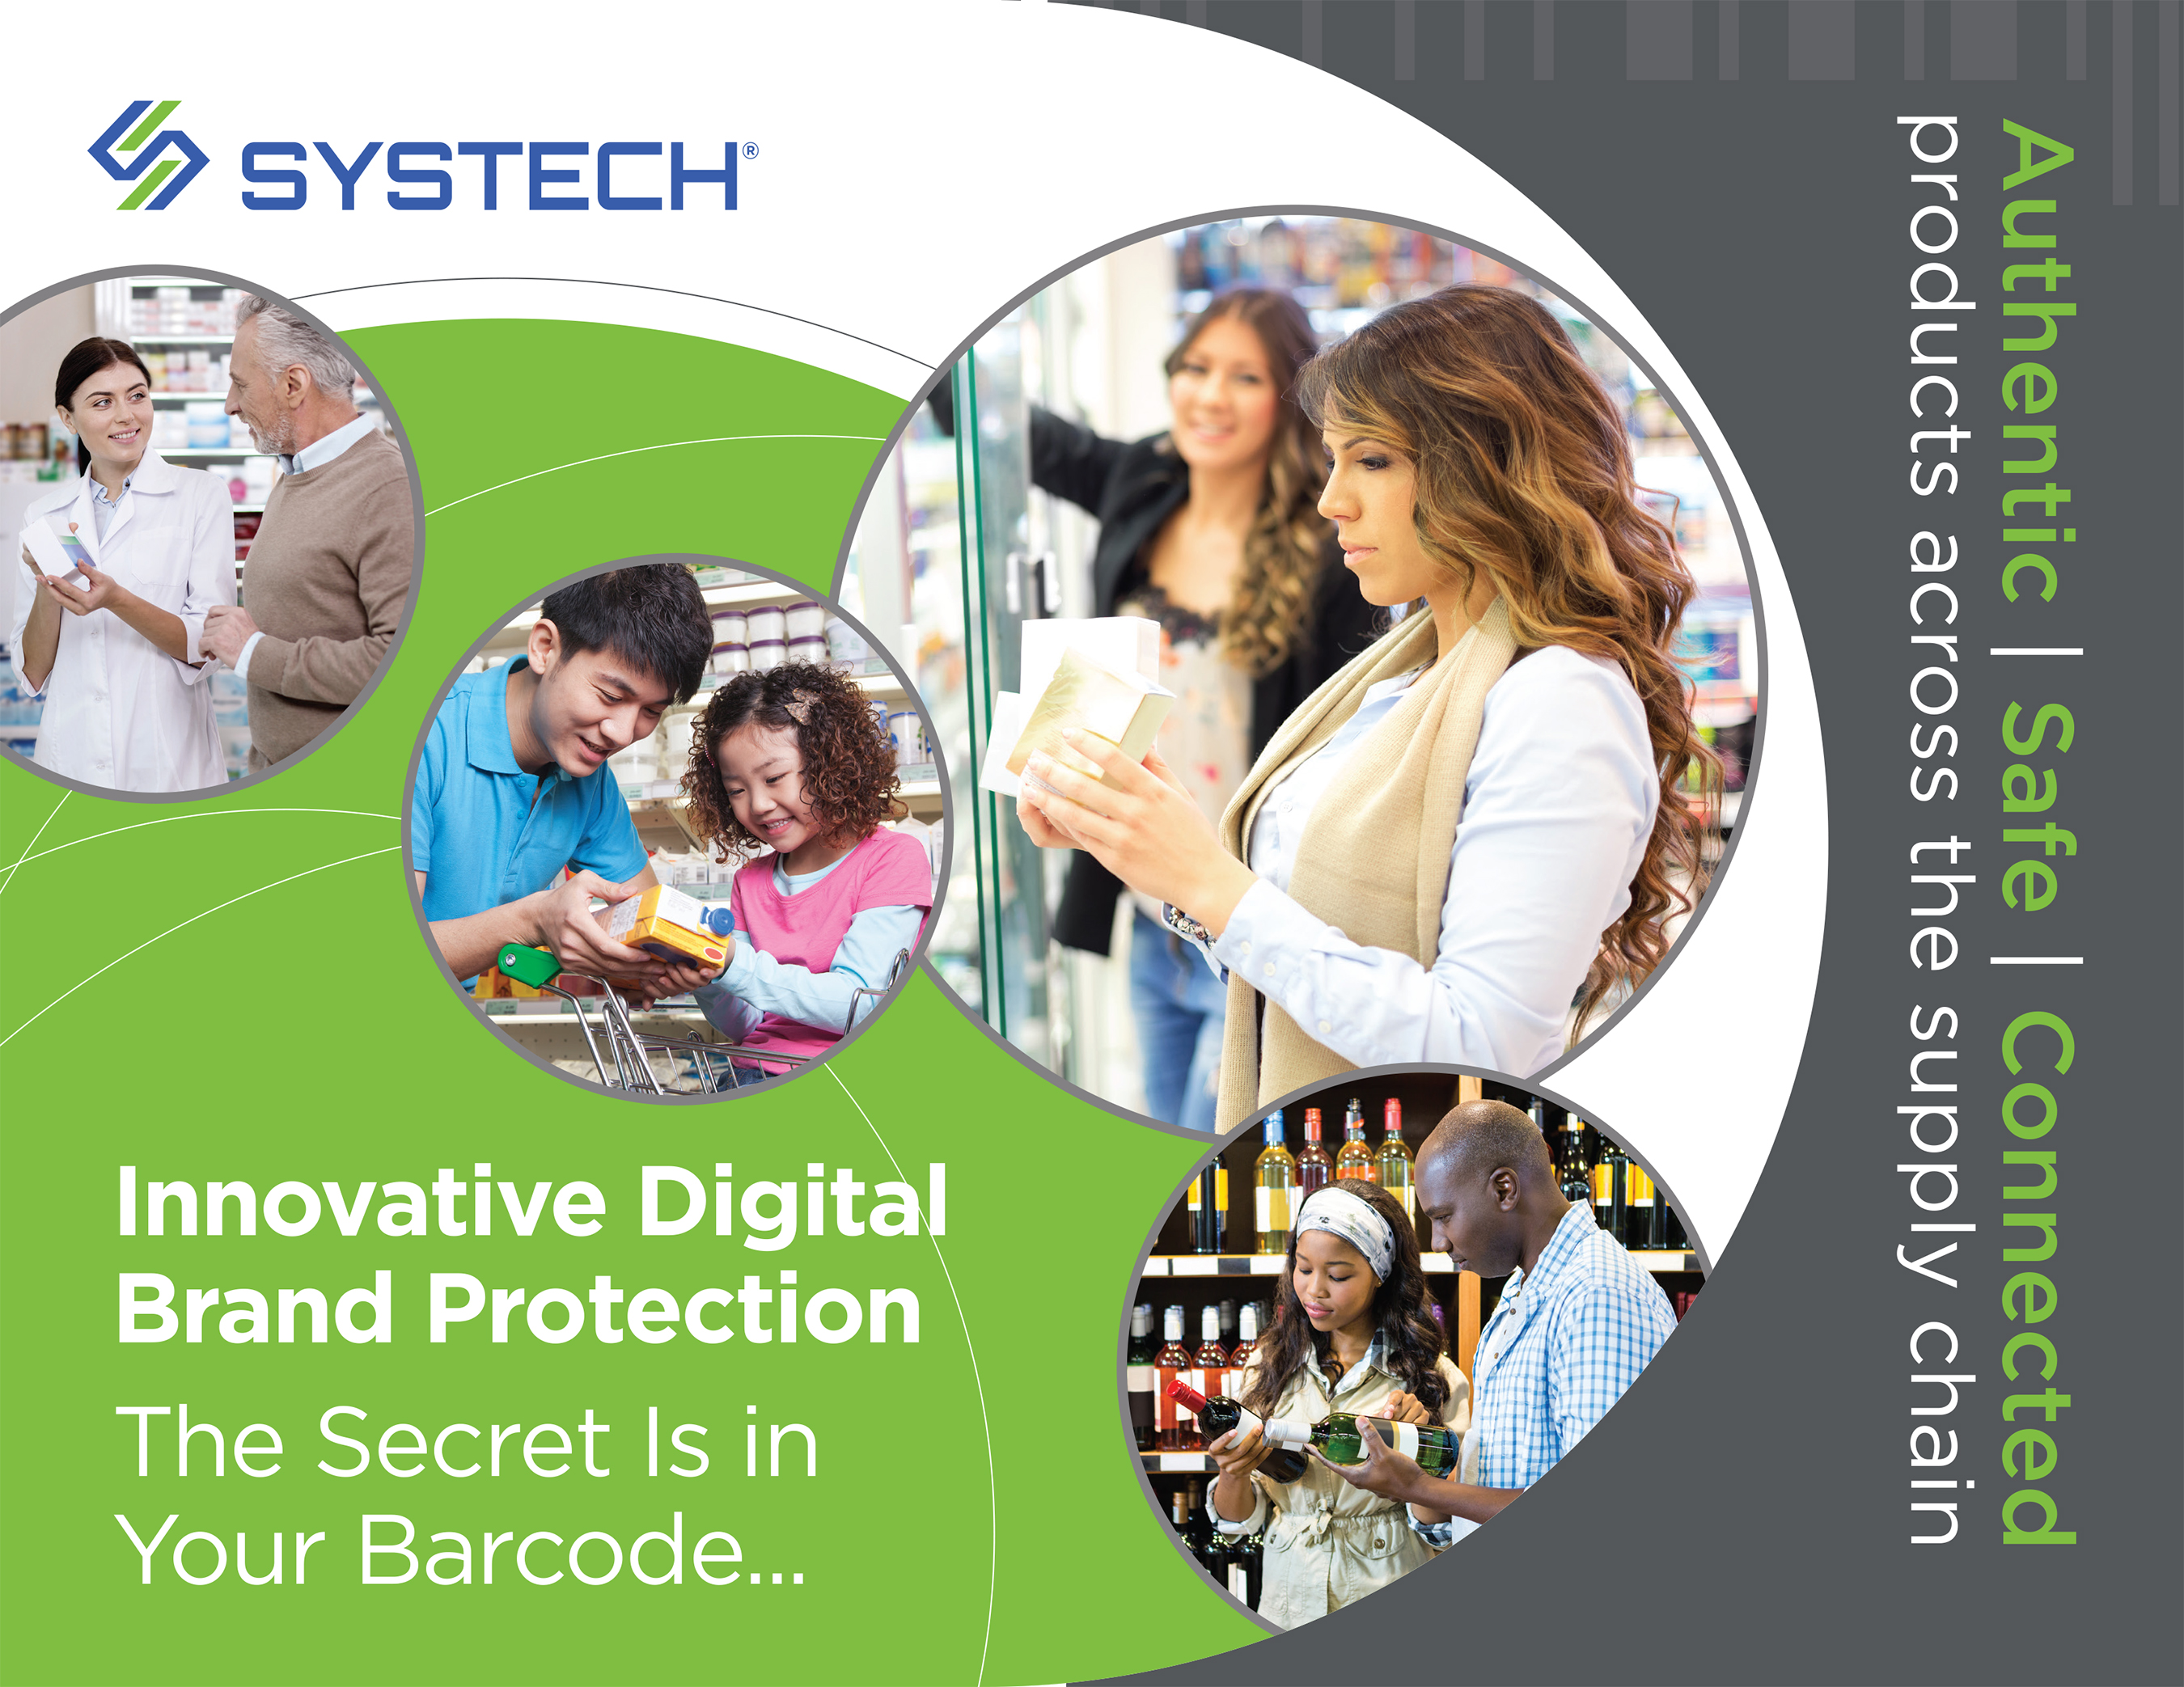 systech-introduces-its-revolutionary-digital-brand-protection-suite